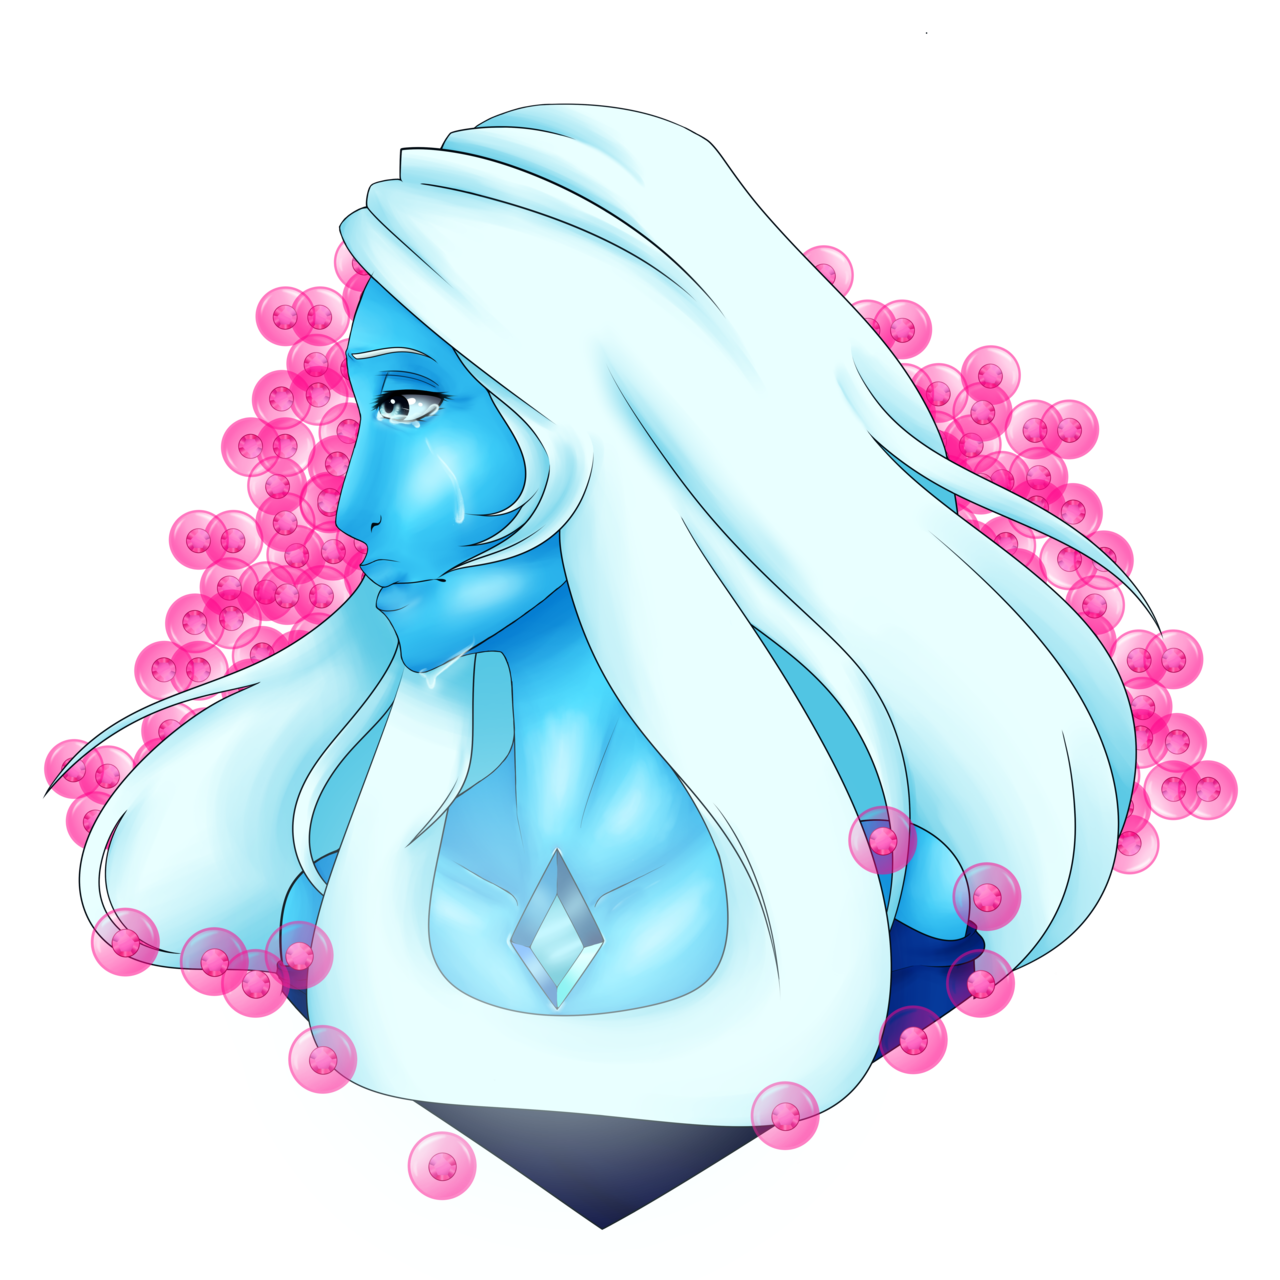 Been a while since I last posted. Its been a year, I believe Here is Blue Diamond Please give me credit if you repost this :)